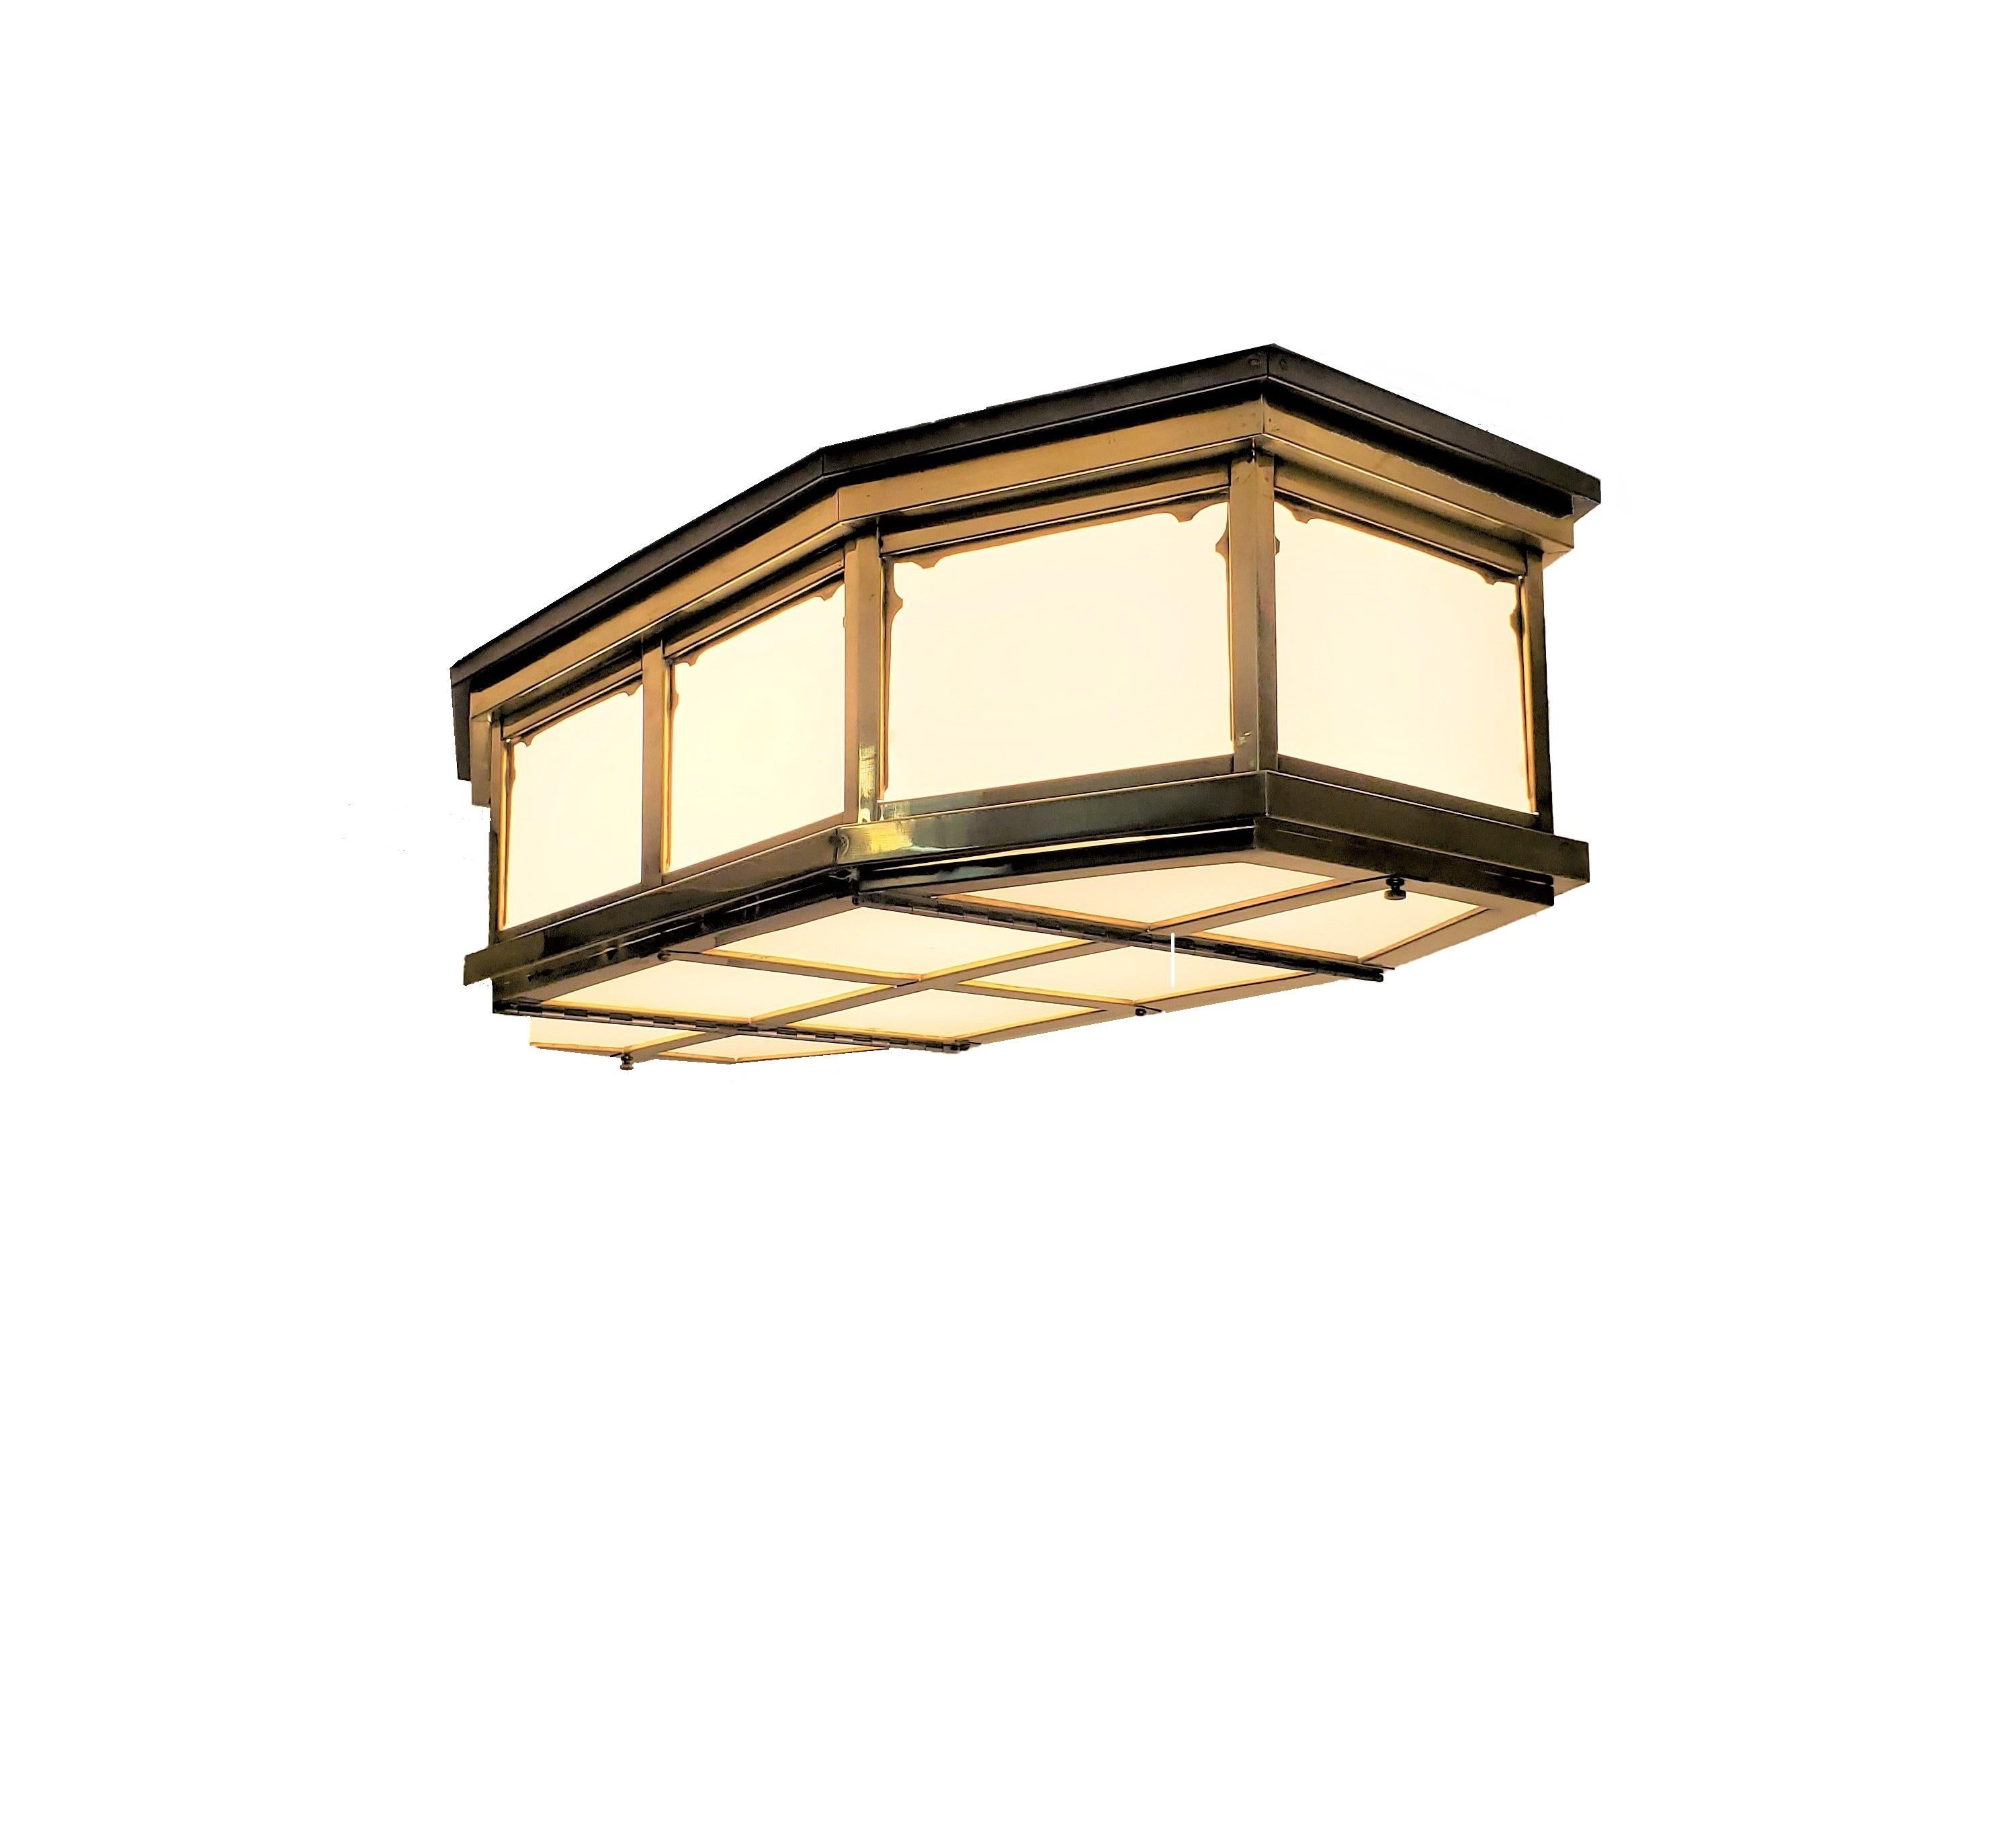 An elongated octagonal Mid-Century Modern glass flush mounted fixture with brass stepped design frame. The eight sided shape features opaque white glass panel insets each circumvented by a decorative frame surround and ending with a grid like, eight